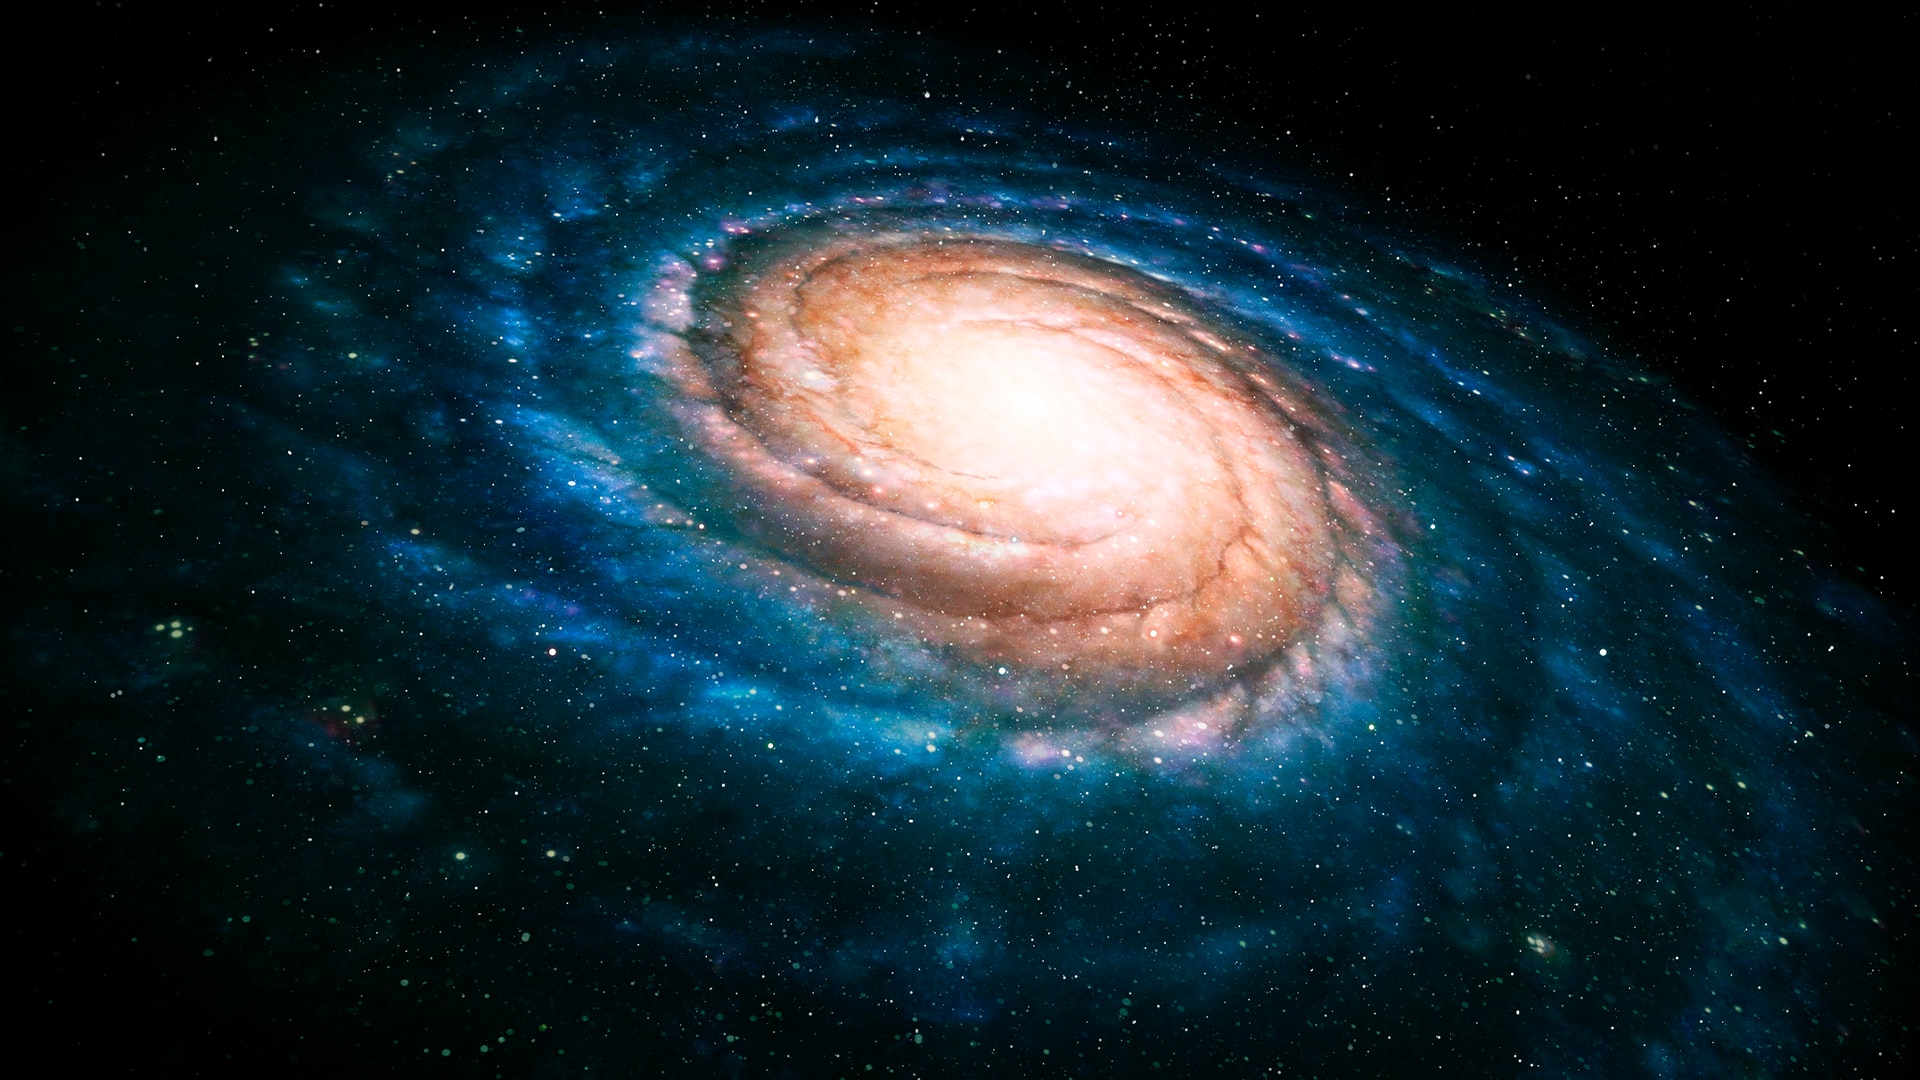 An image of a galaxy